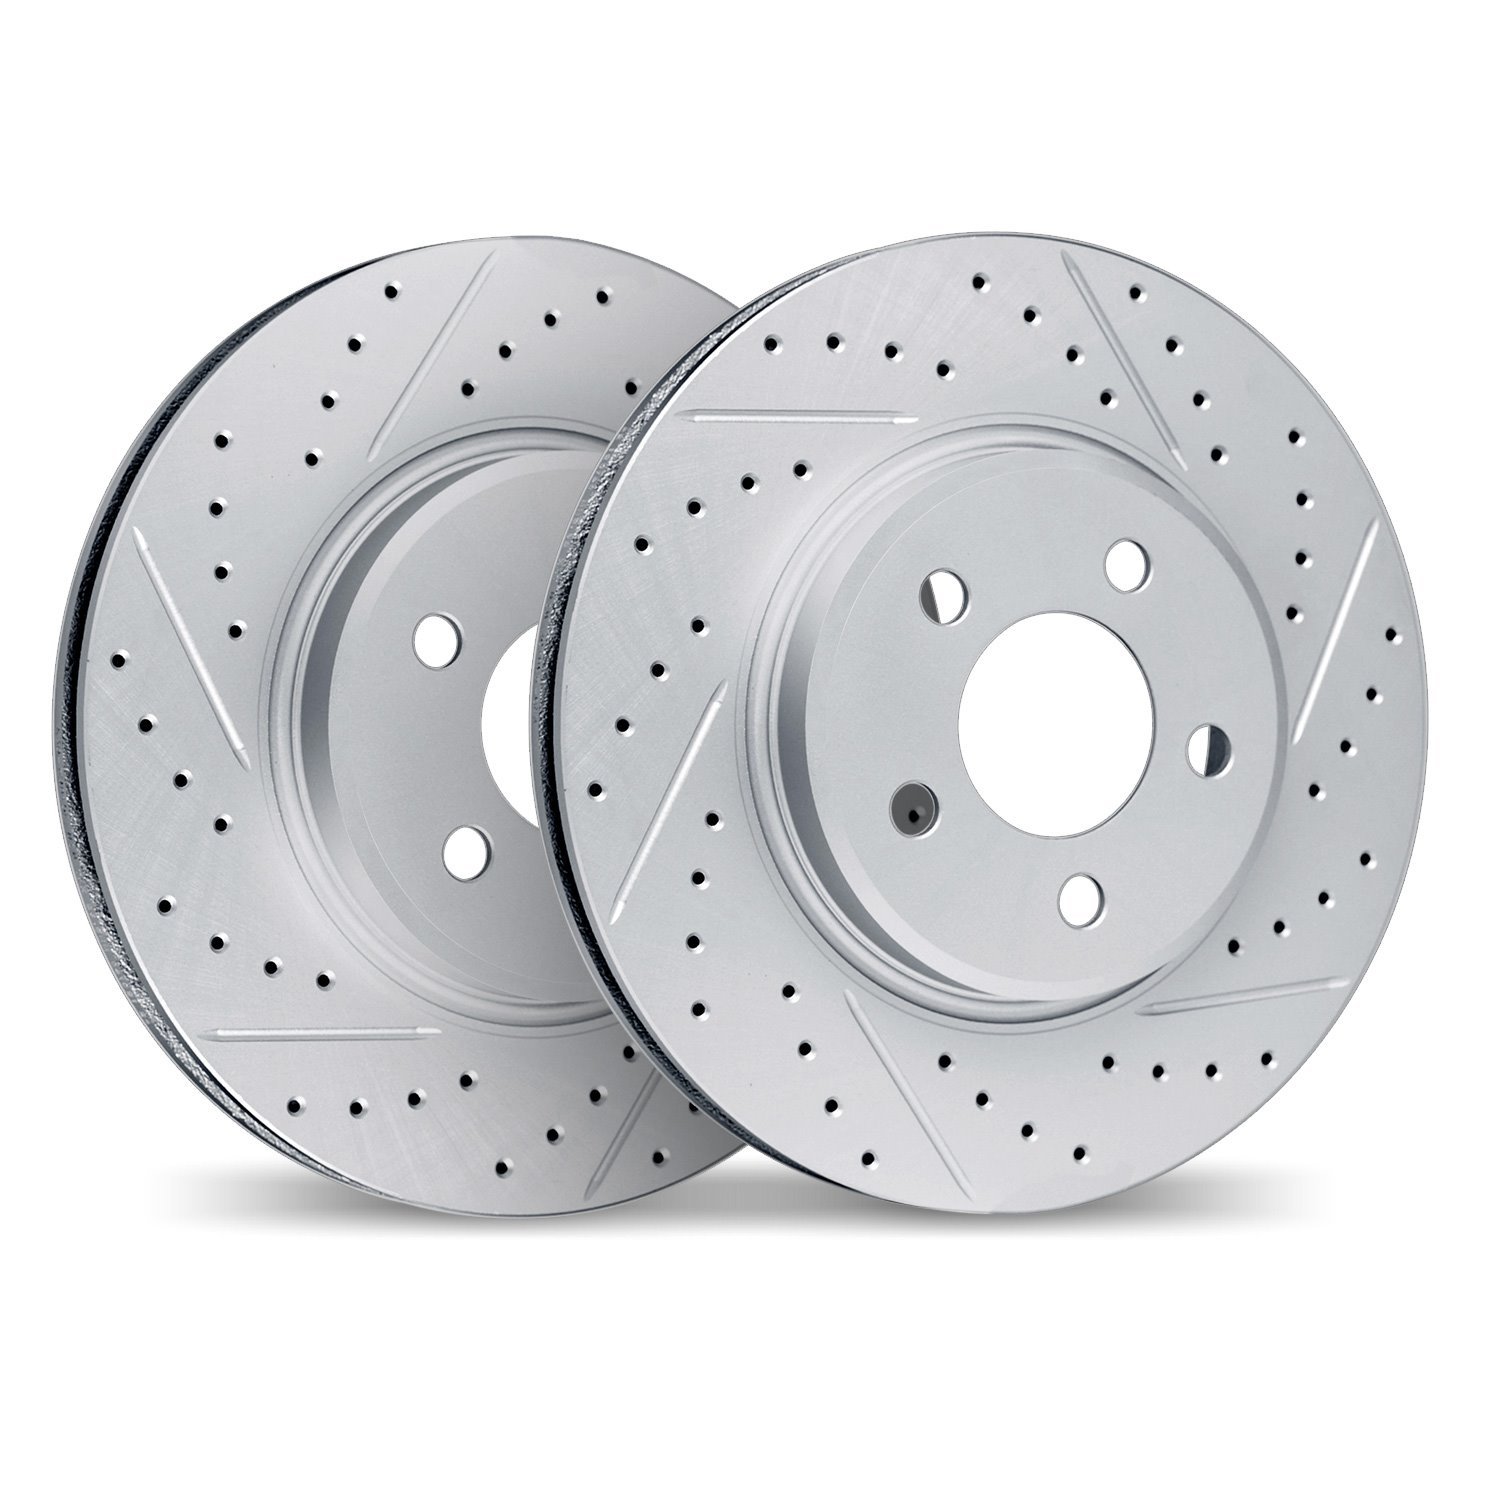 2002-31017 Geoperformance Drilled/Slotted Brake Rotors, 1989-1995 BMW, Position: Front